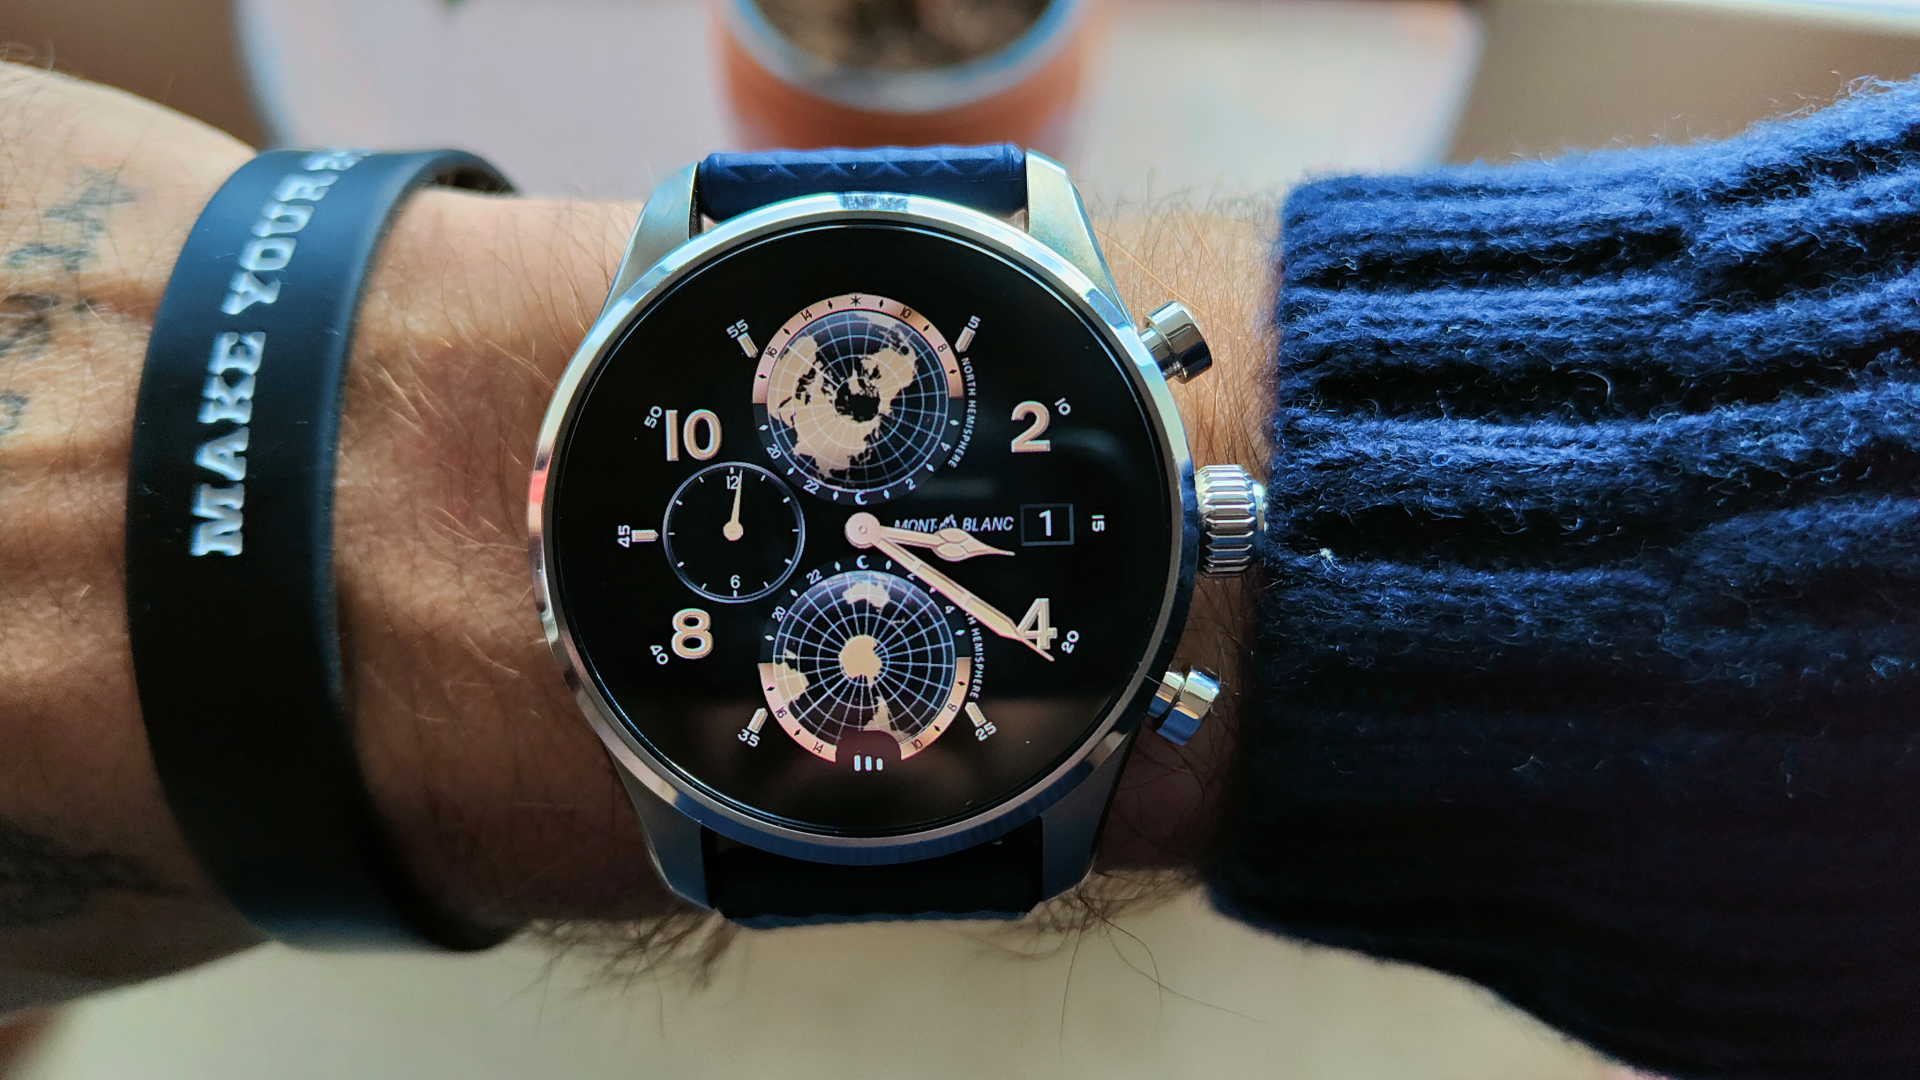 Here's how Qualcomm-powered Wear OS watches will take on Apple Watch - CNET